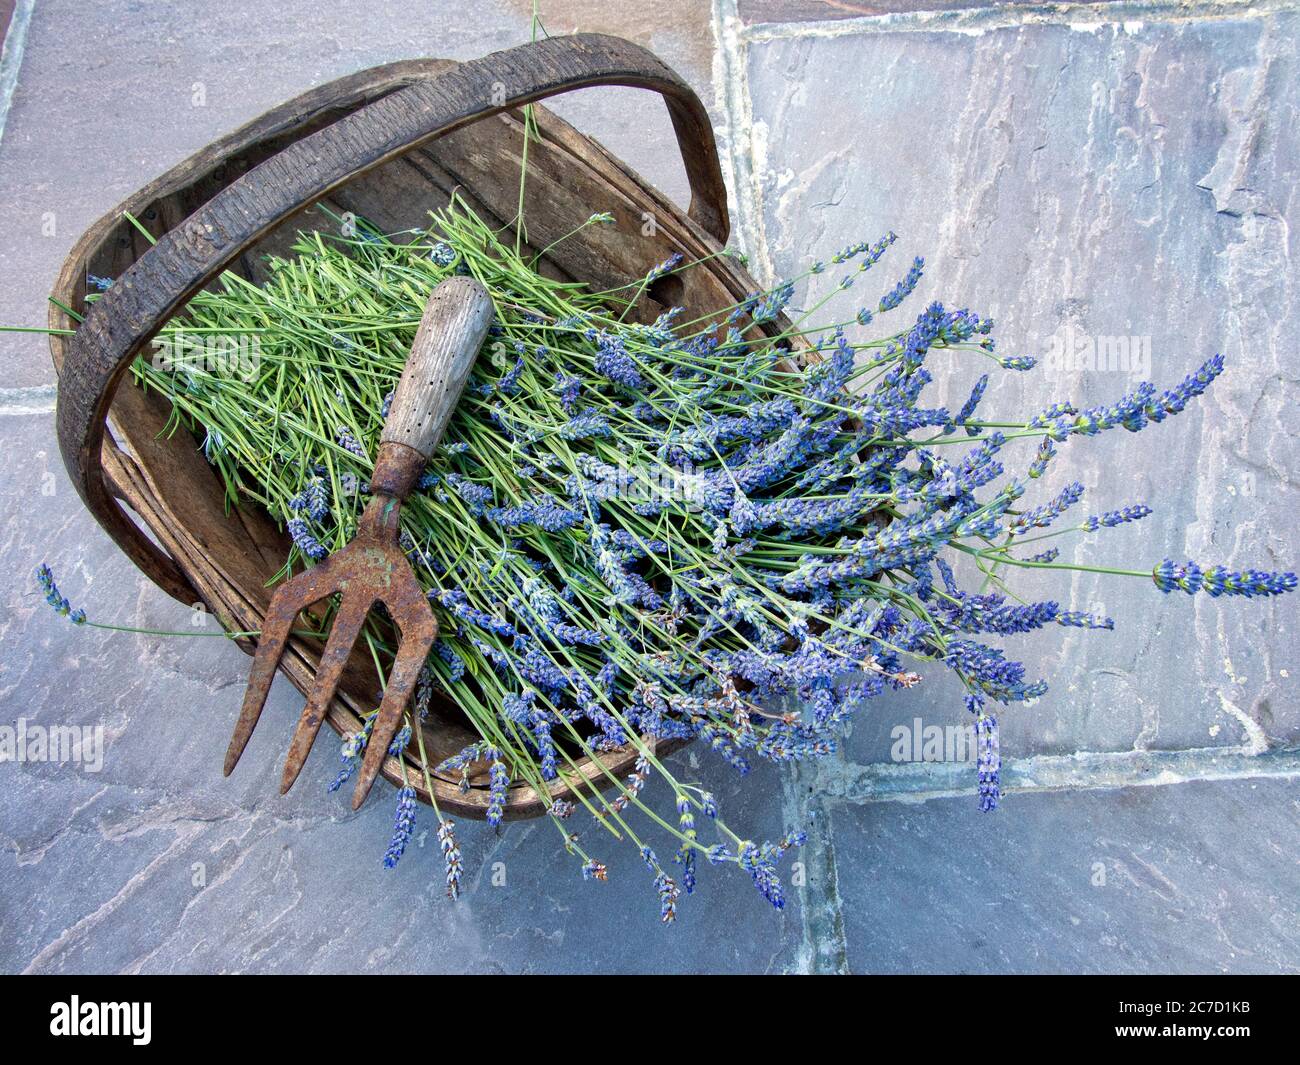 New season lavender flowers in a traditional trug. Stock Photo